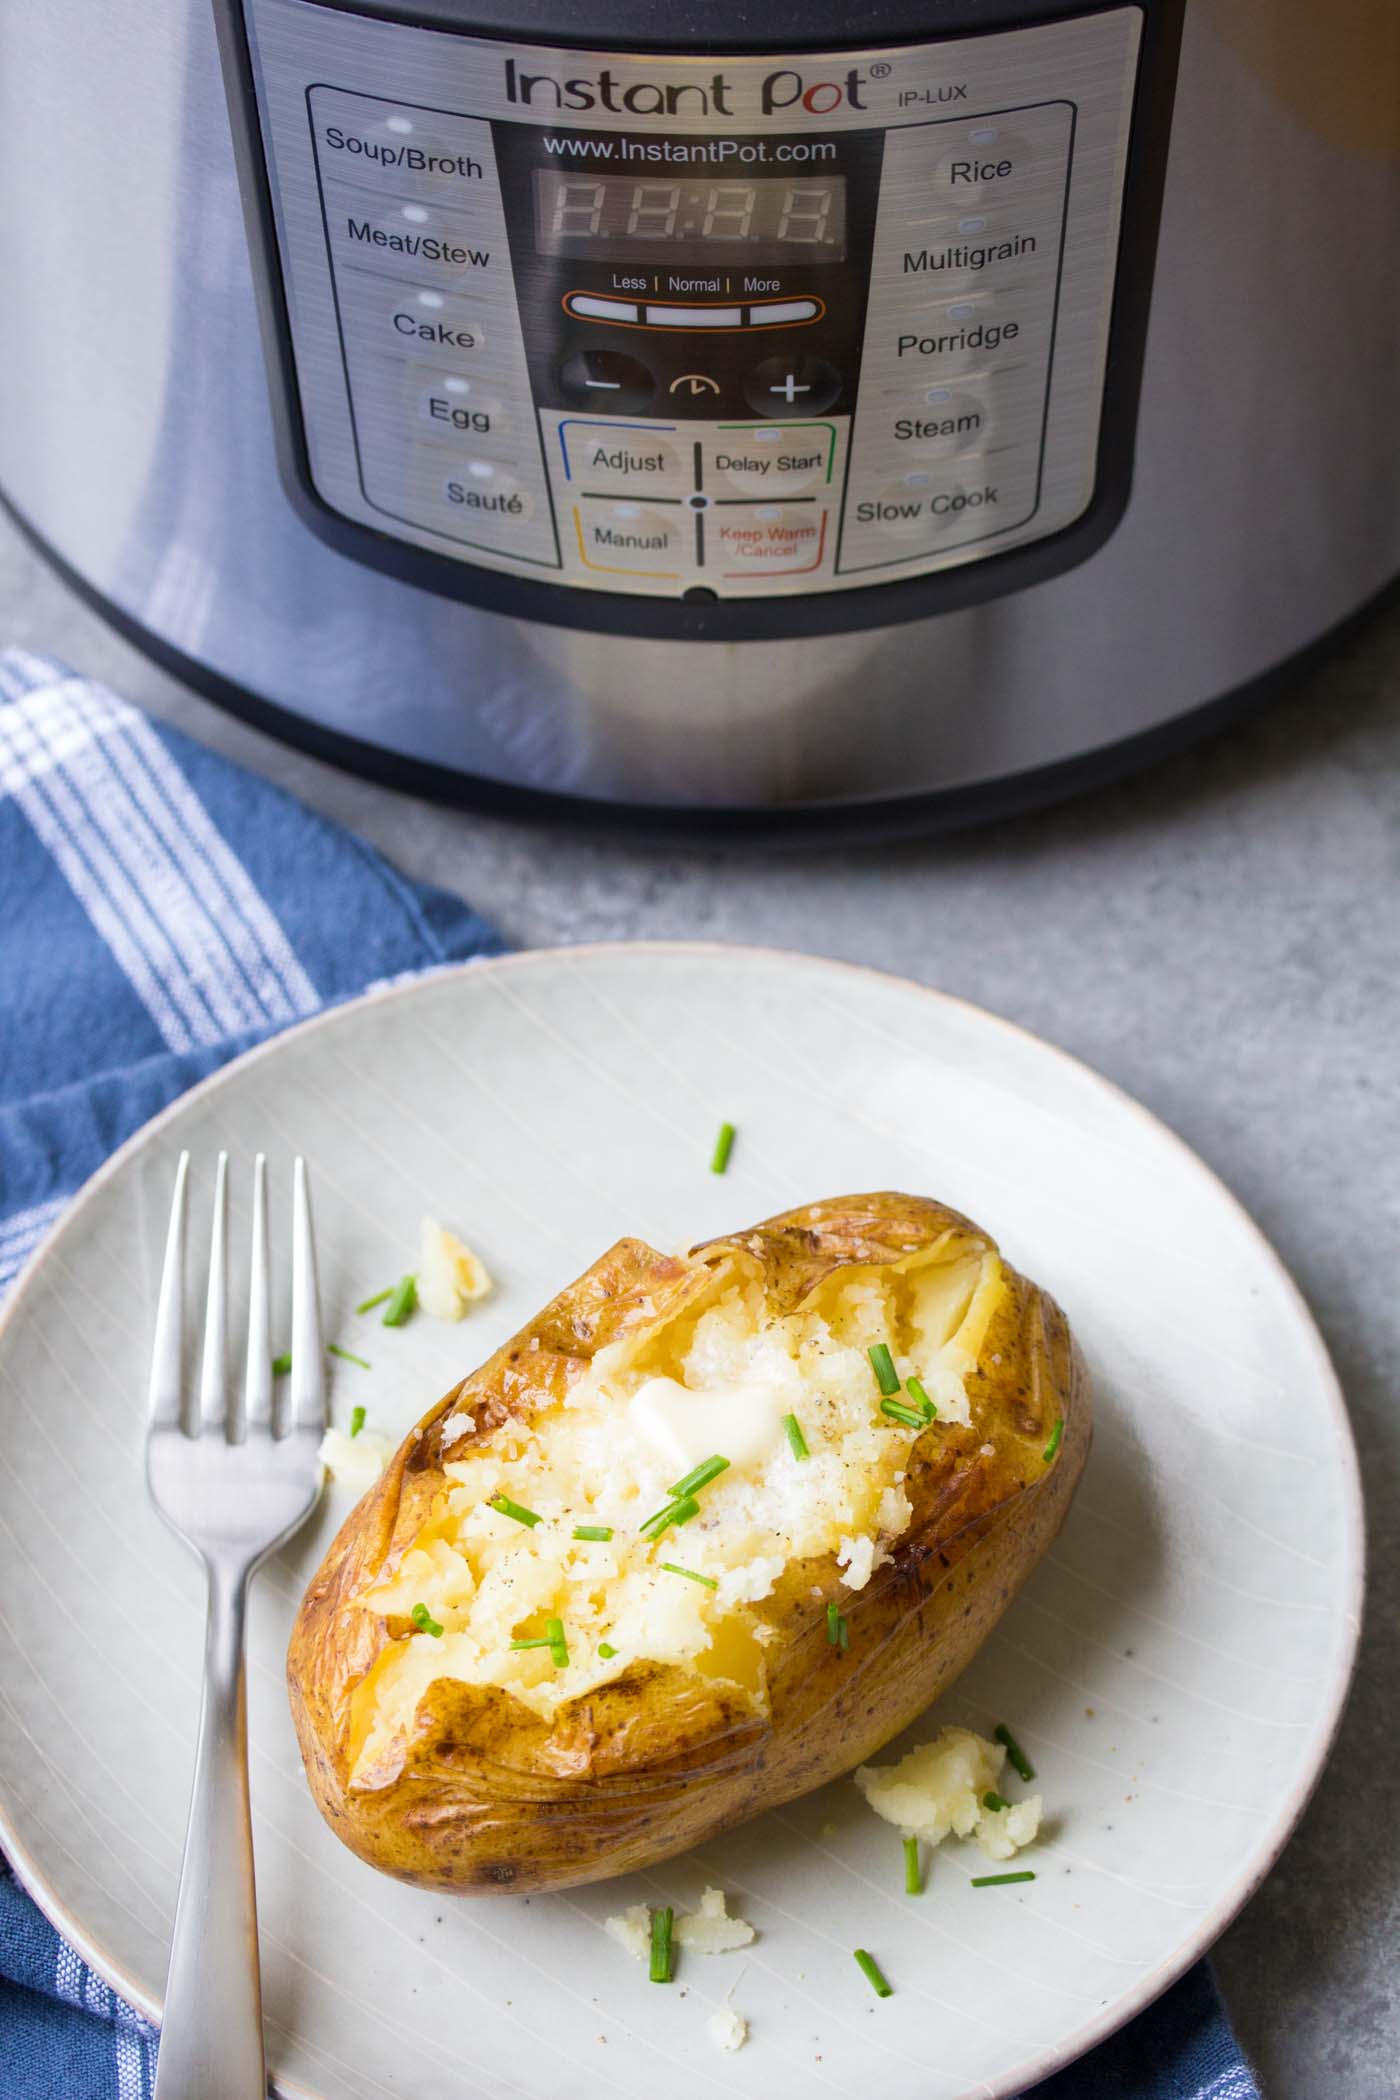 Plated baked potato topped with salt, pepper, butter and chives, with instant pot in the background.